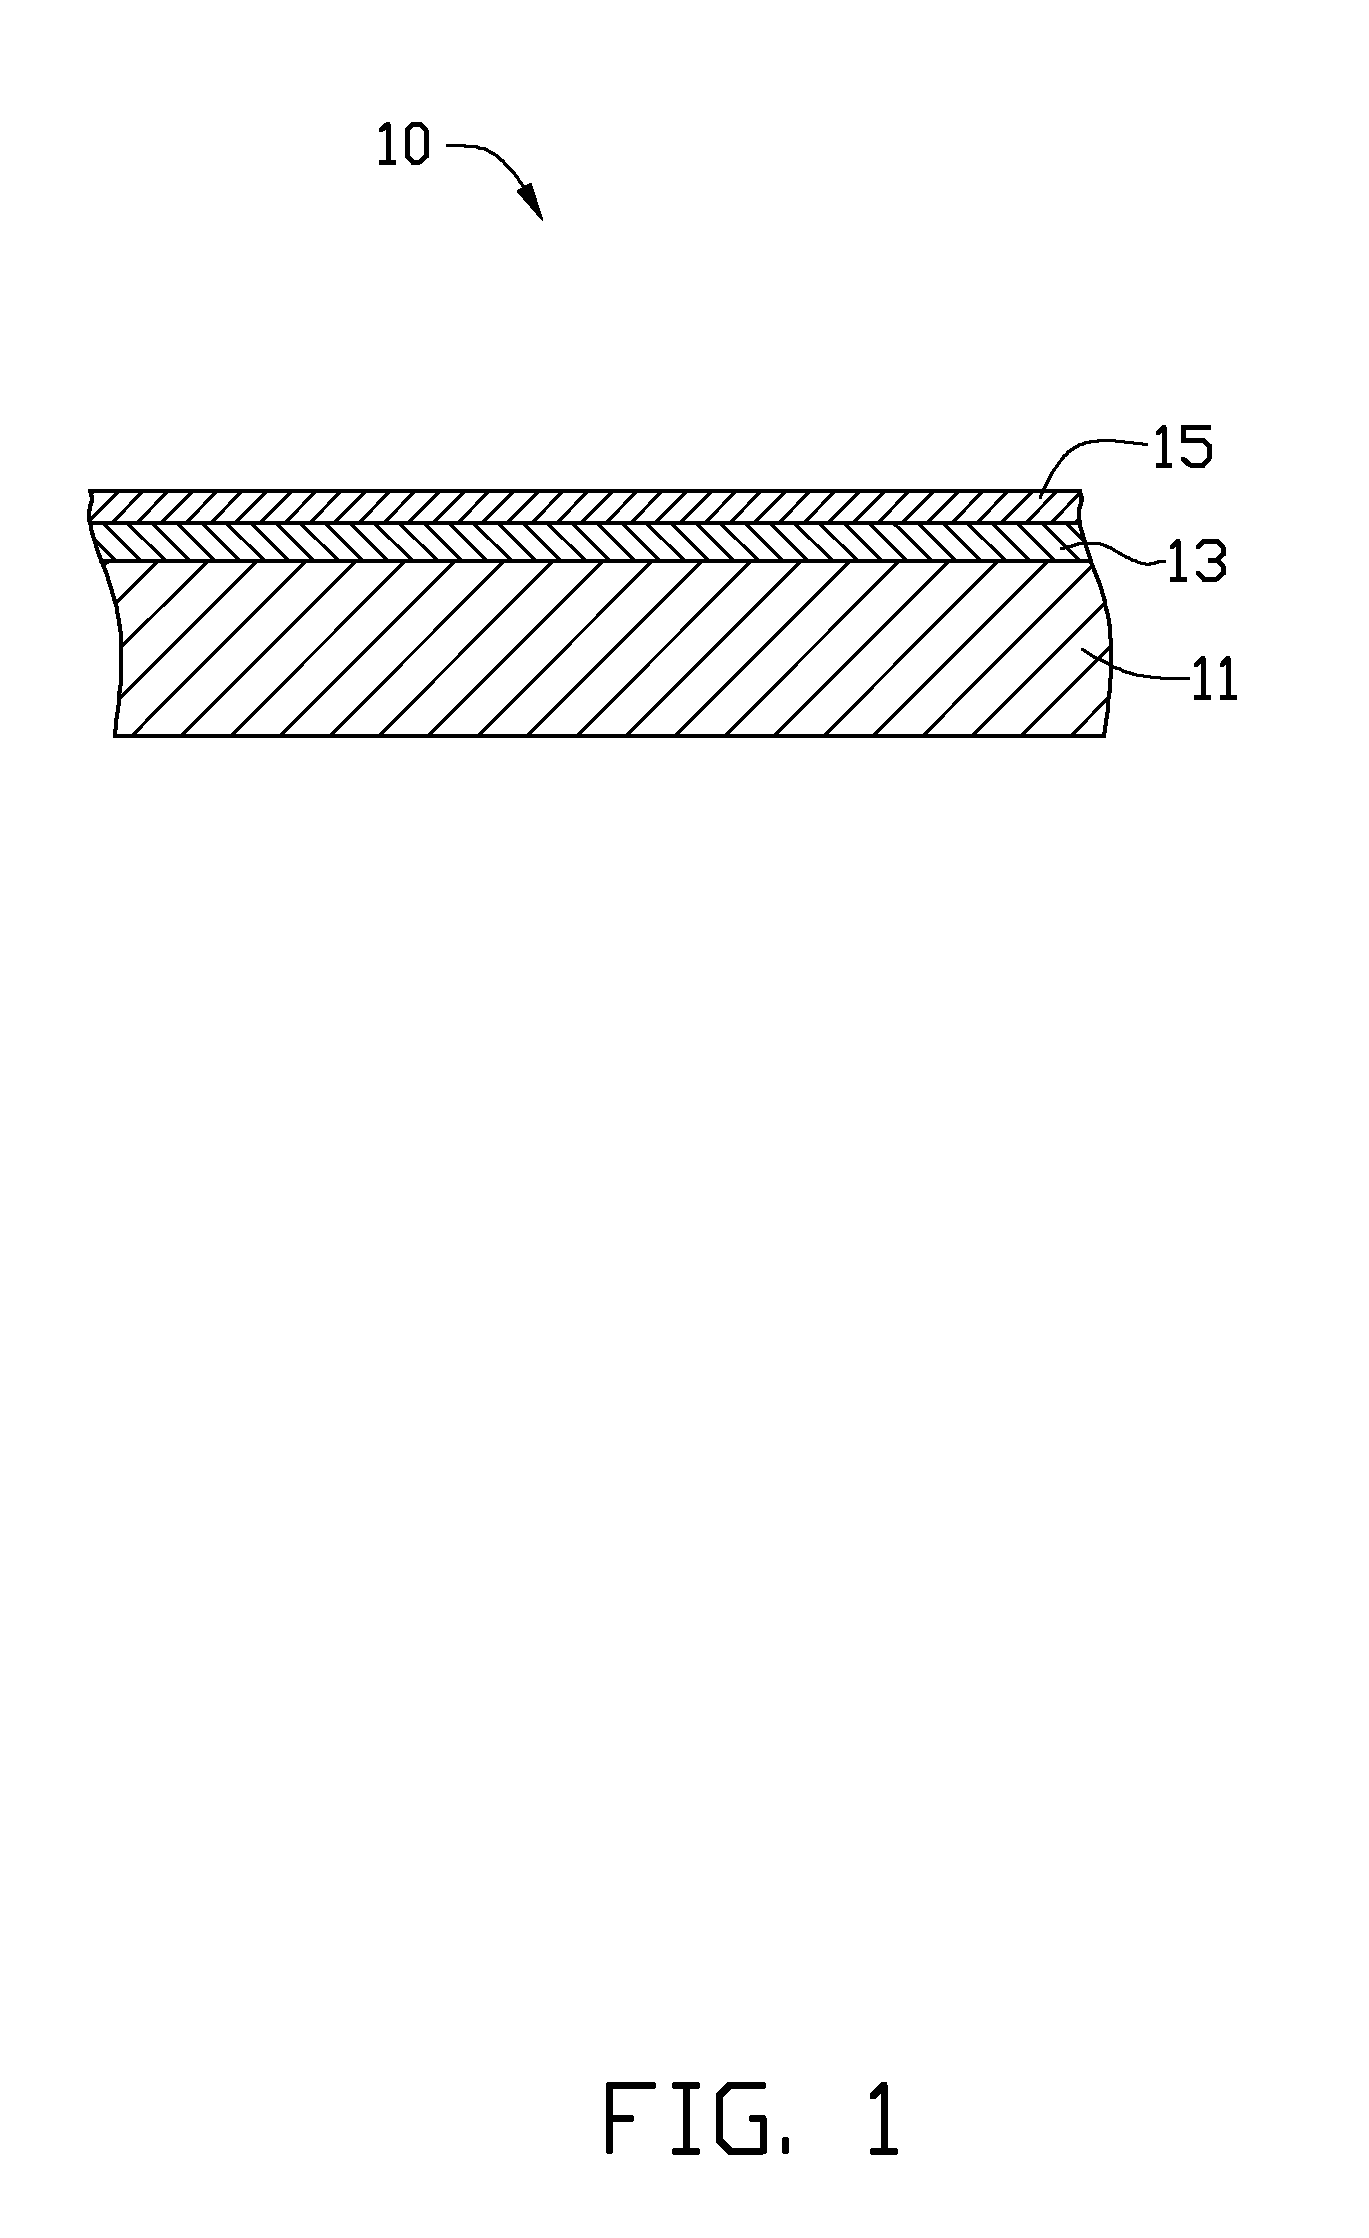 Coated article and method for making the same